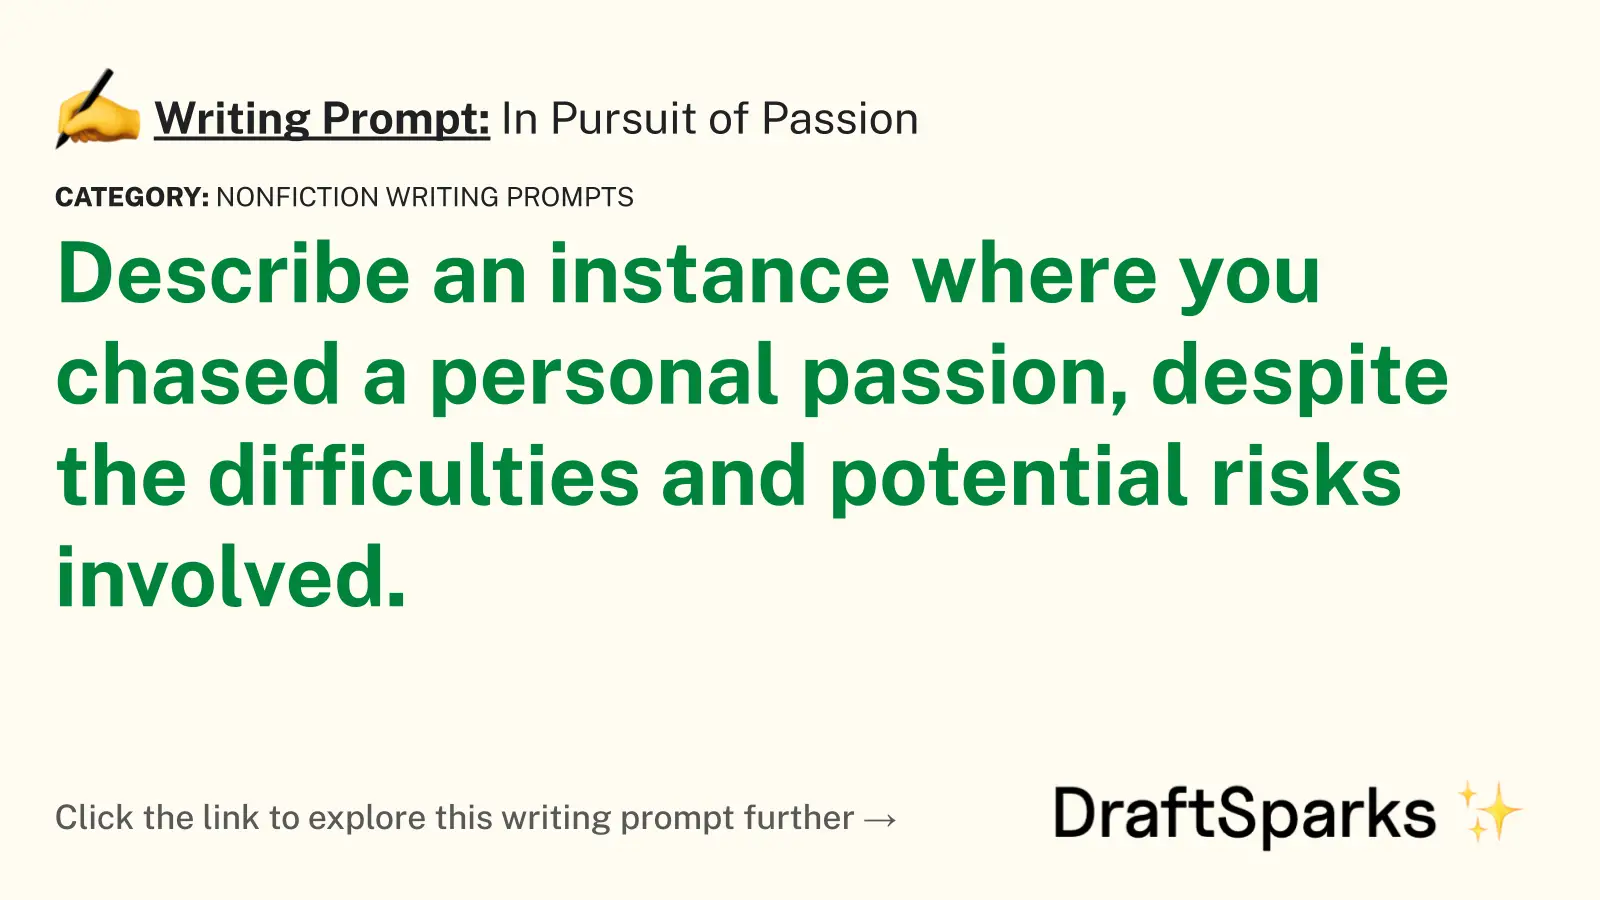 In Pursuit of Passion